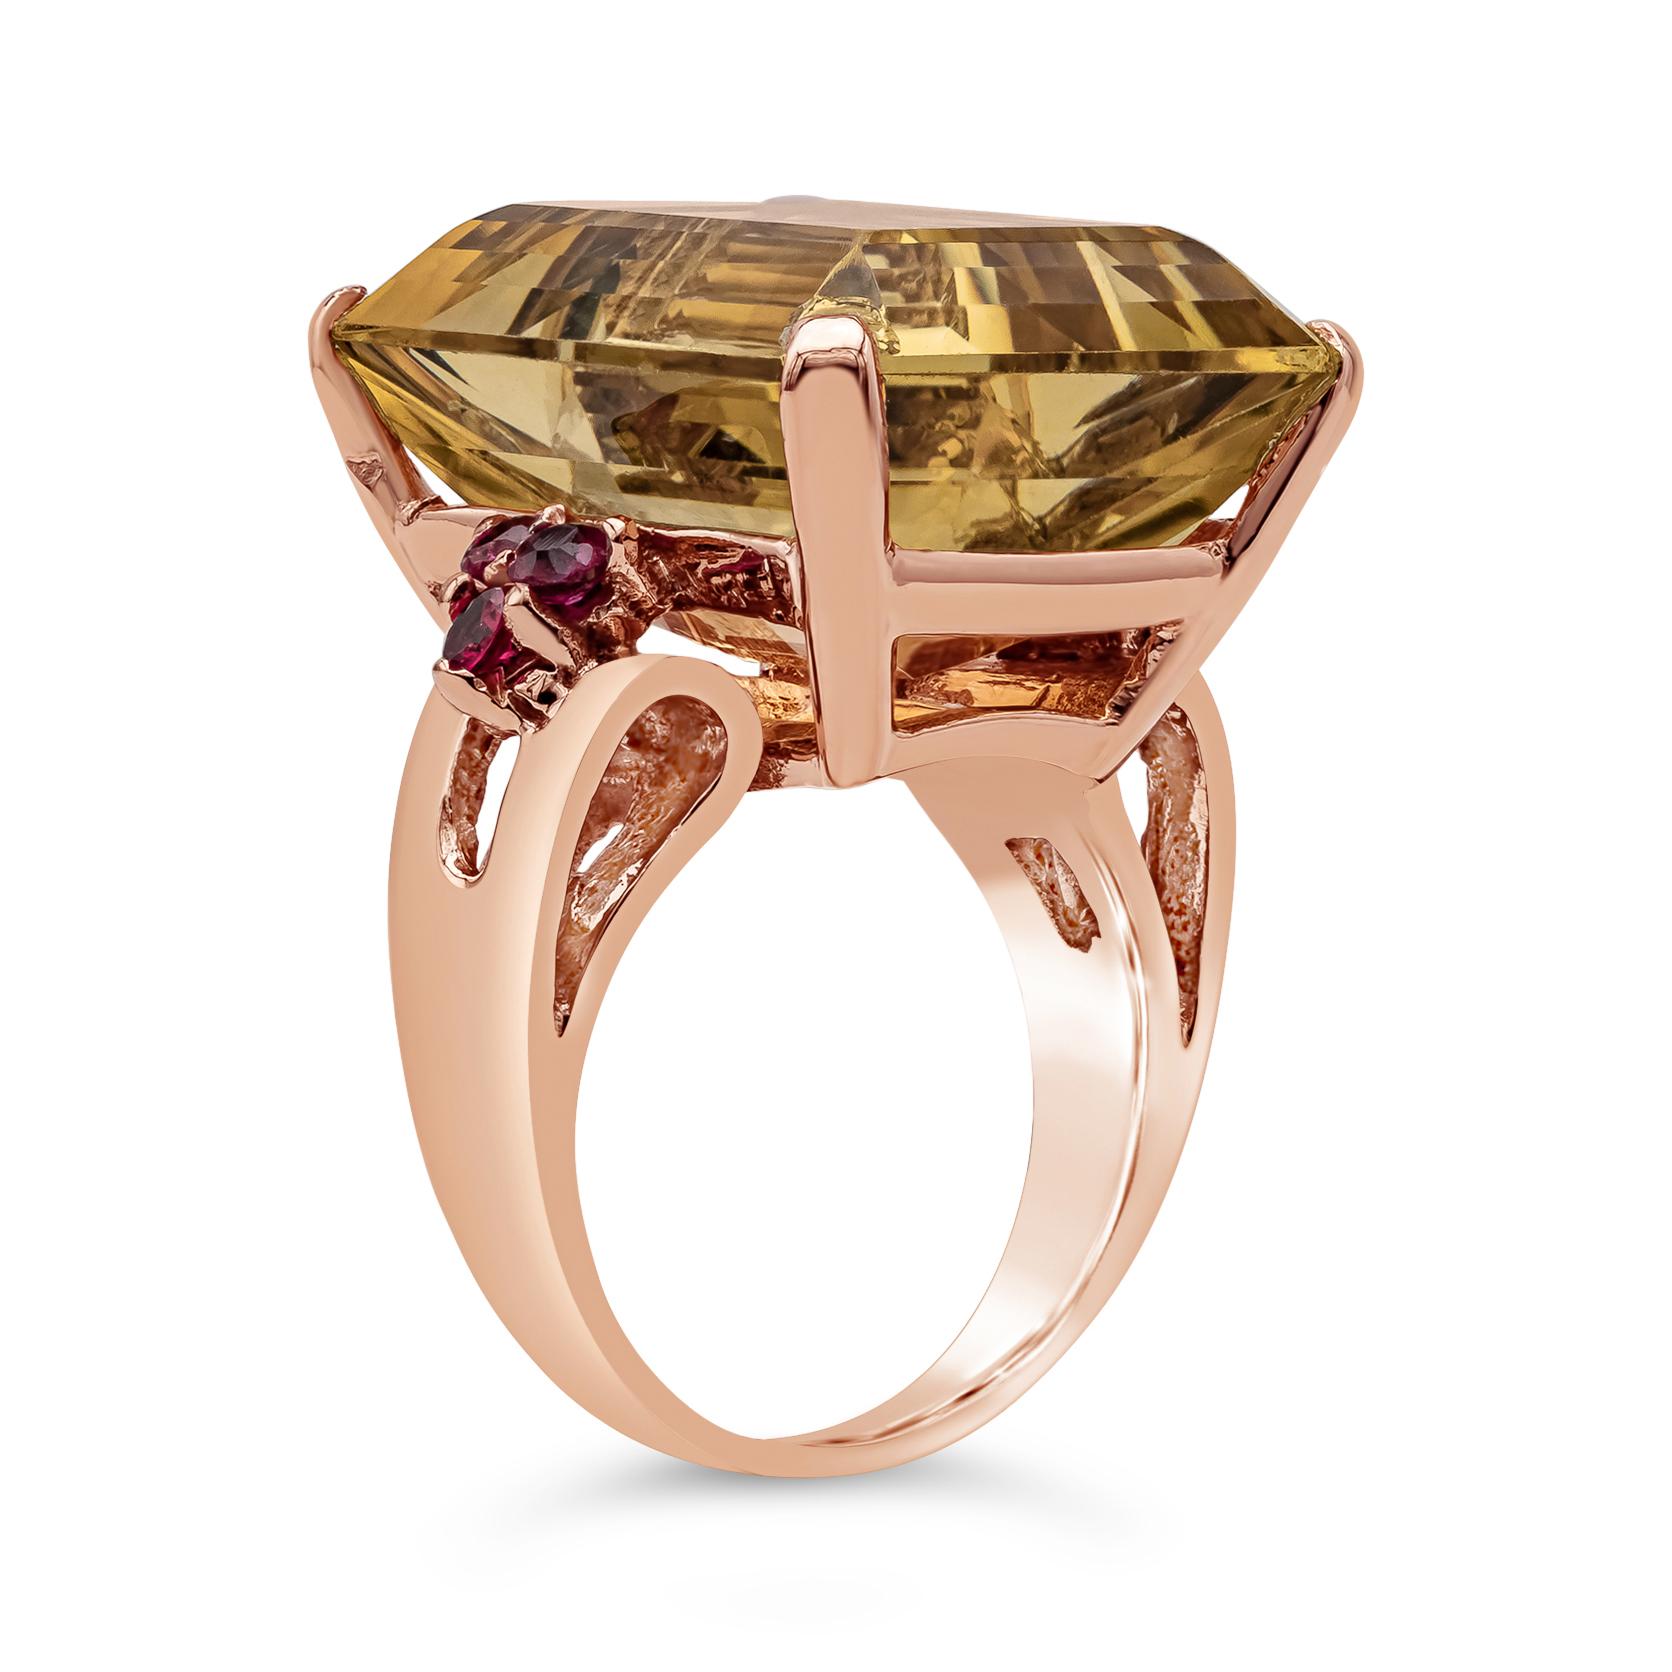 Contemporary 23.92 Carats Emerald Cut Golden Citrine and Round Ruby Cocktail Ring  For Sale